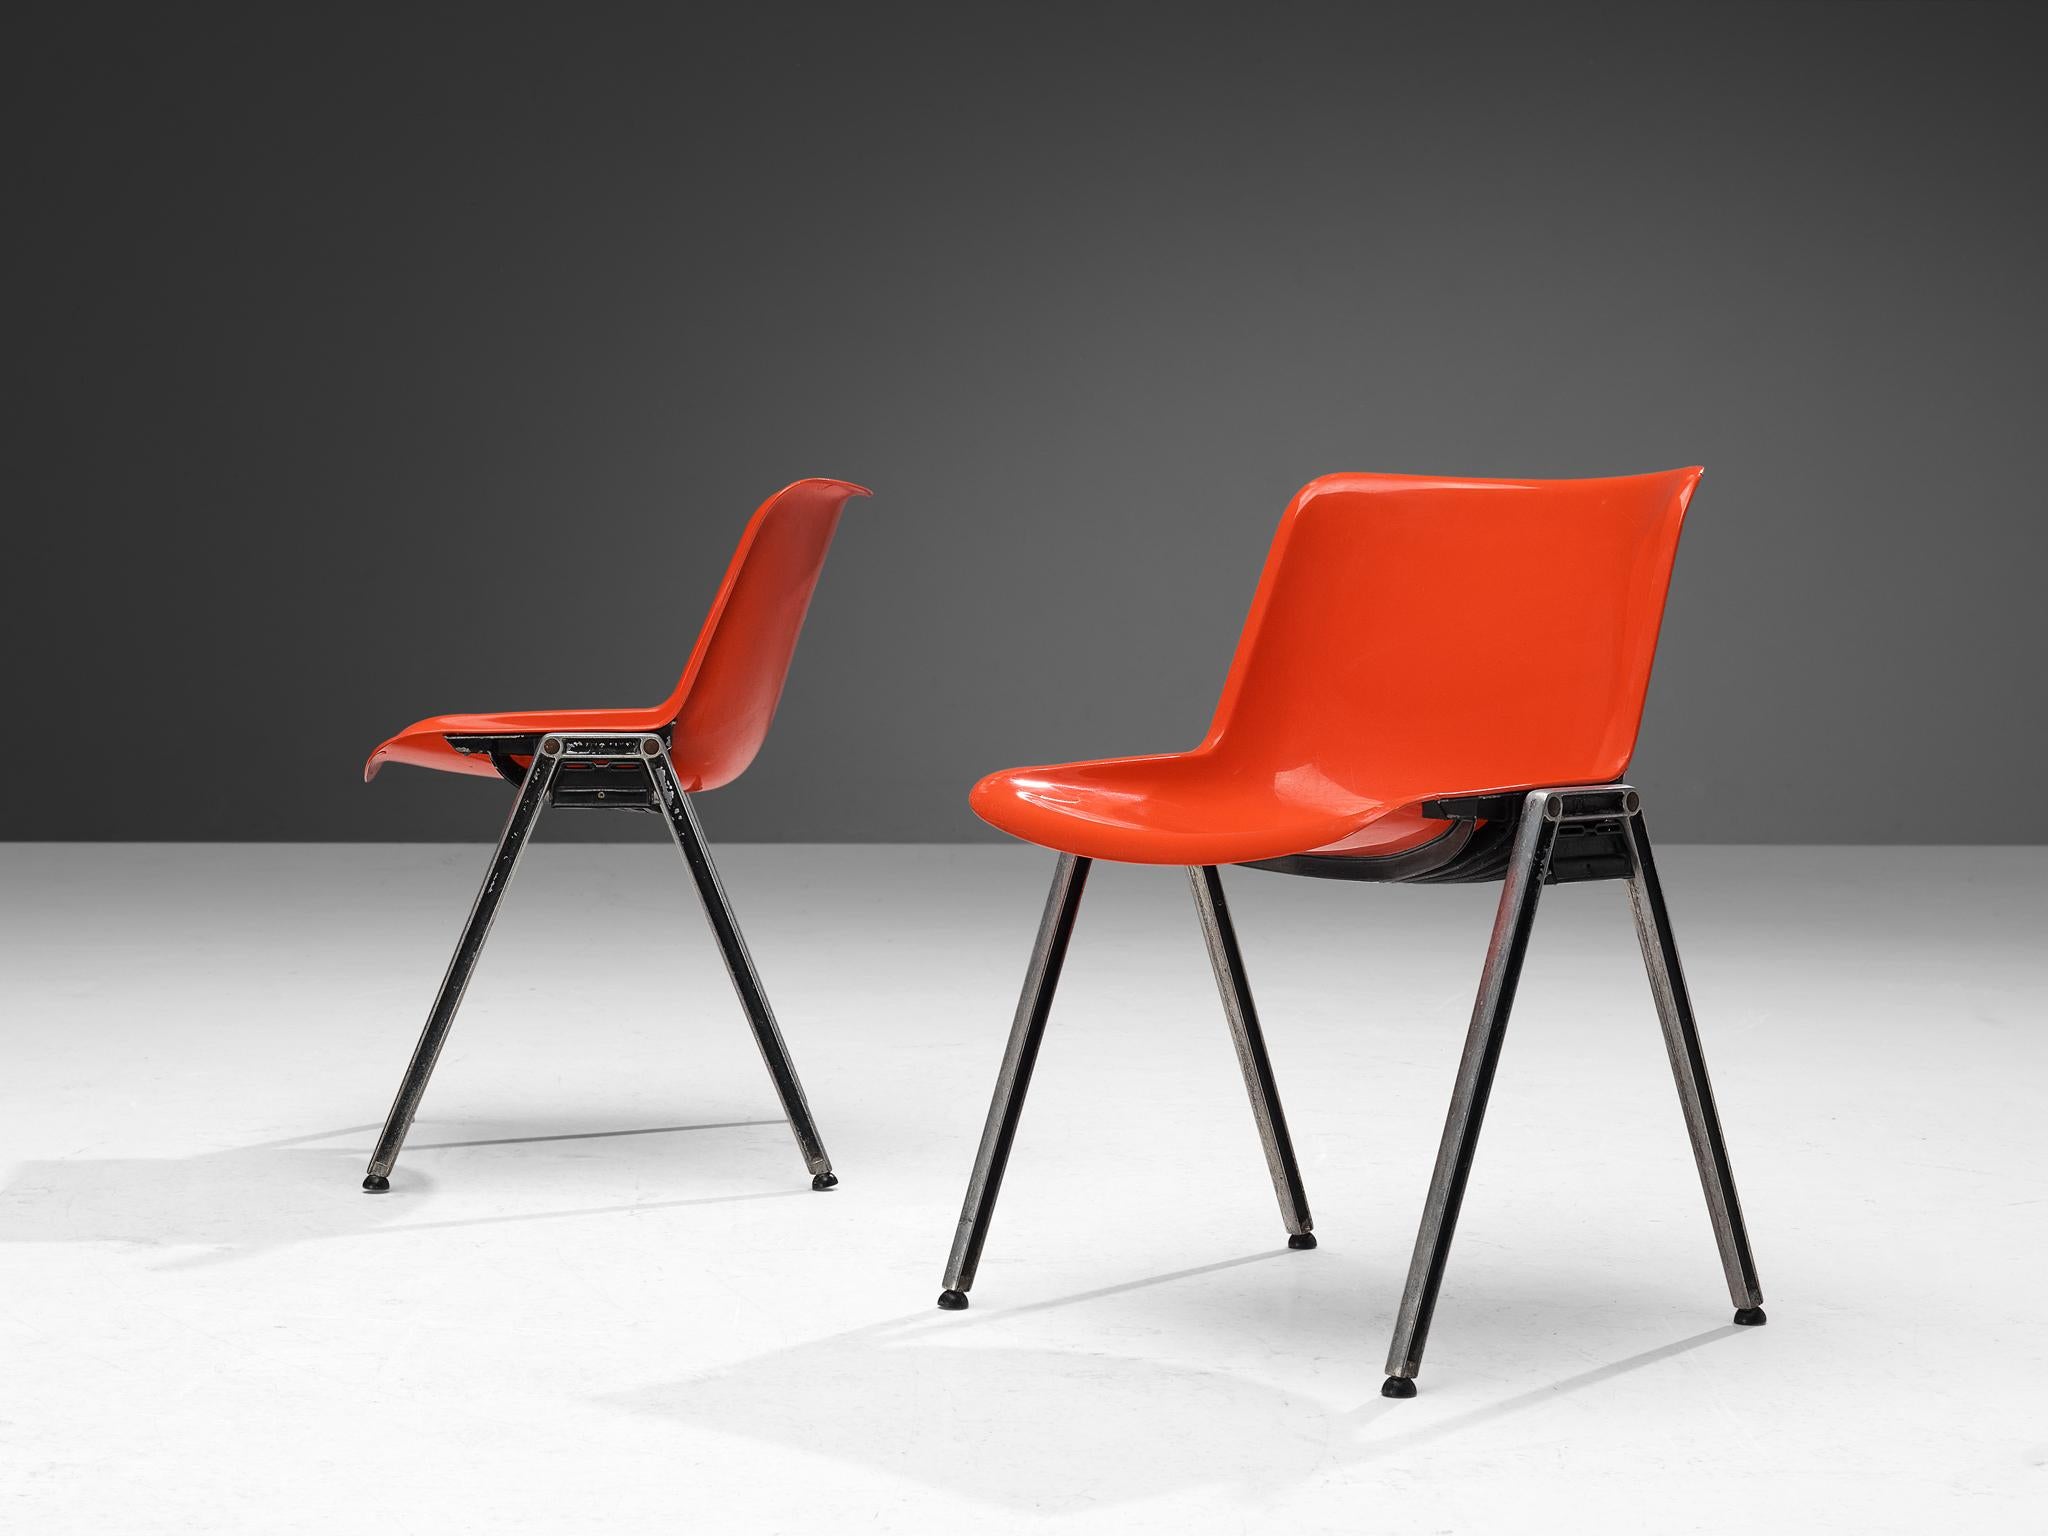 Centro Progetti Tecno, pair of stackable chairs model ‘Modus', nylon / plastic, aluminum, metal, Italy, 1970s

Highly functional chairs designed by Centro Progetti Tecno that are part of the Modus seating system, the first project to initiate by